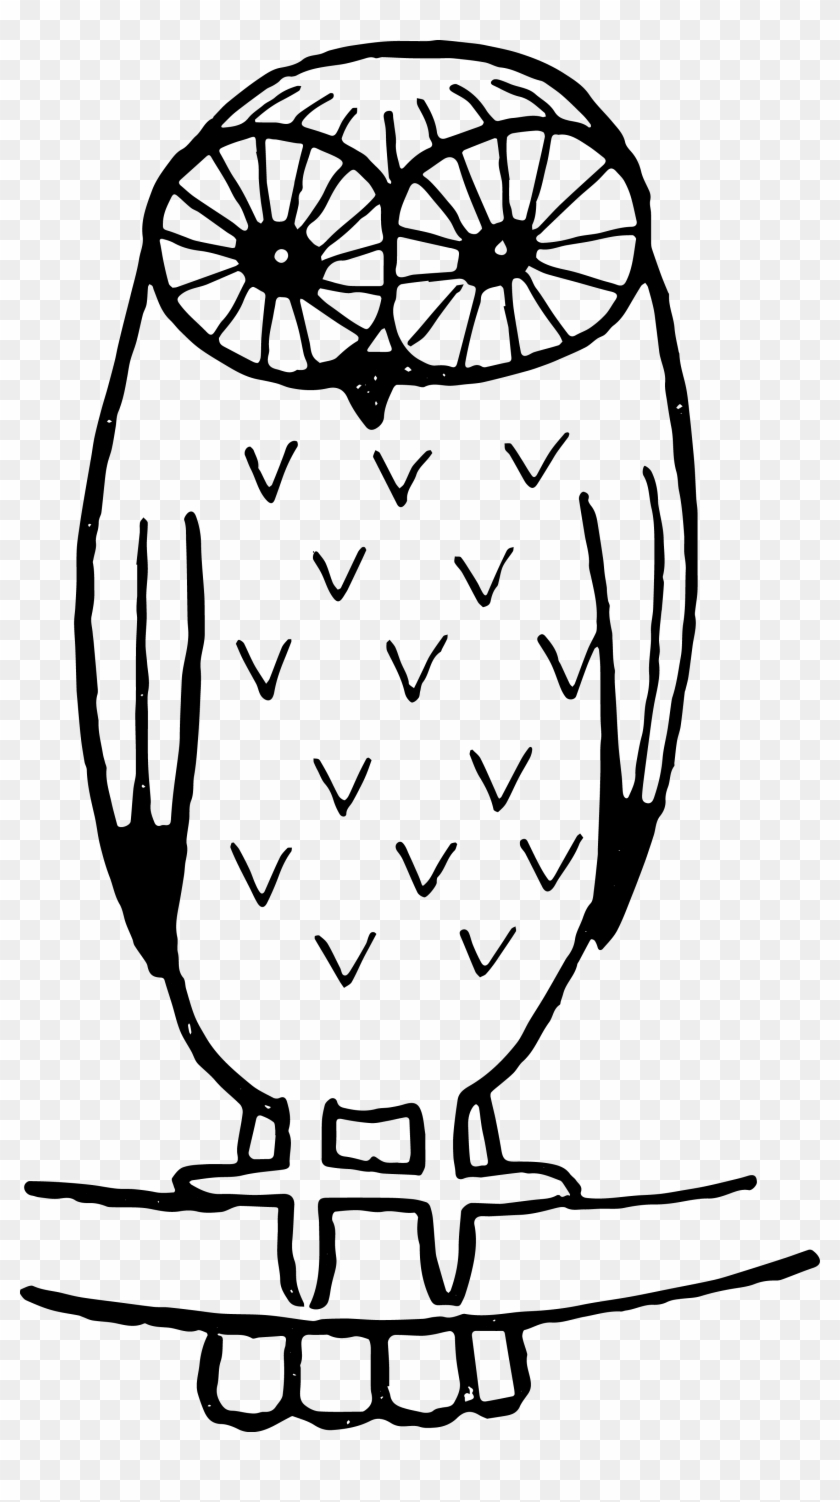 Royalty Free Stock Retro Owl Vector - Stock Vectors Png Royalty Free Clipart